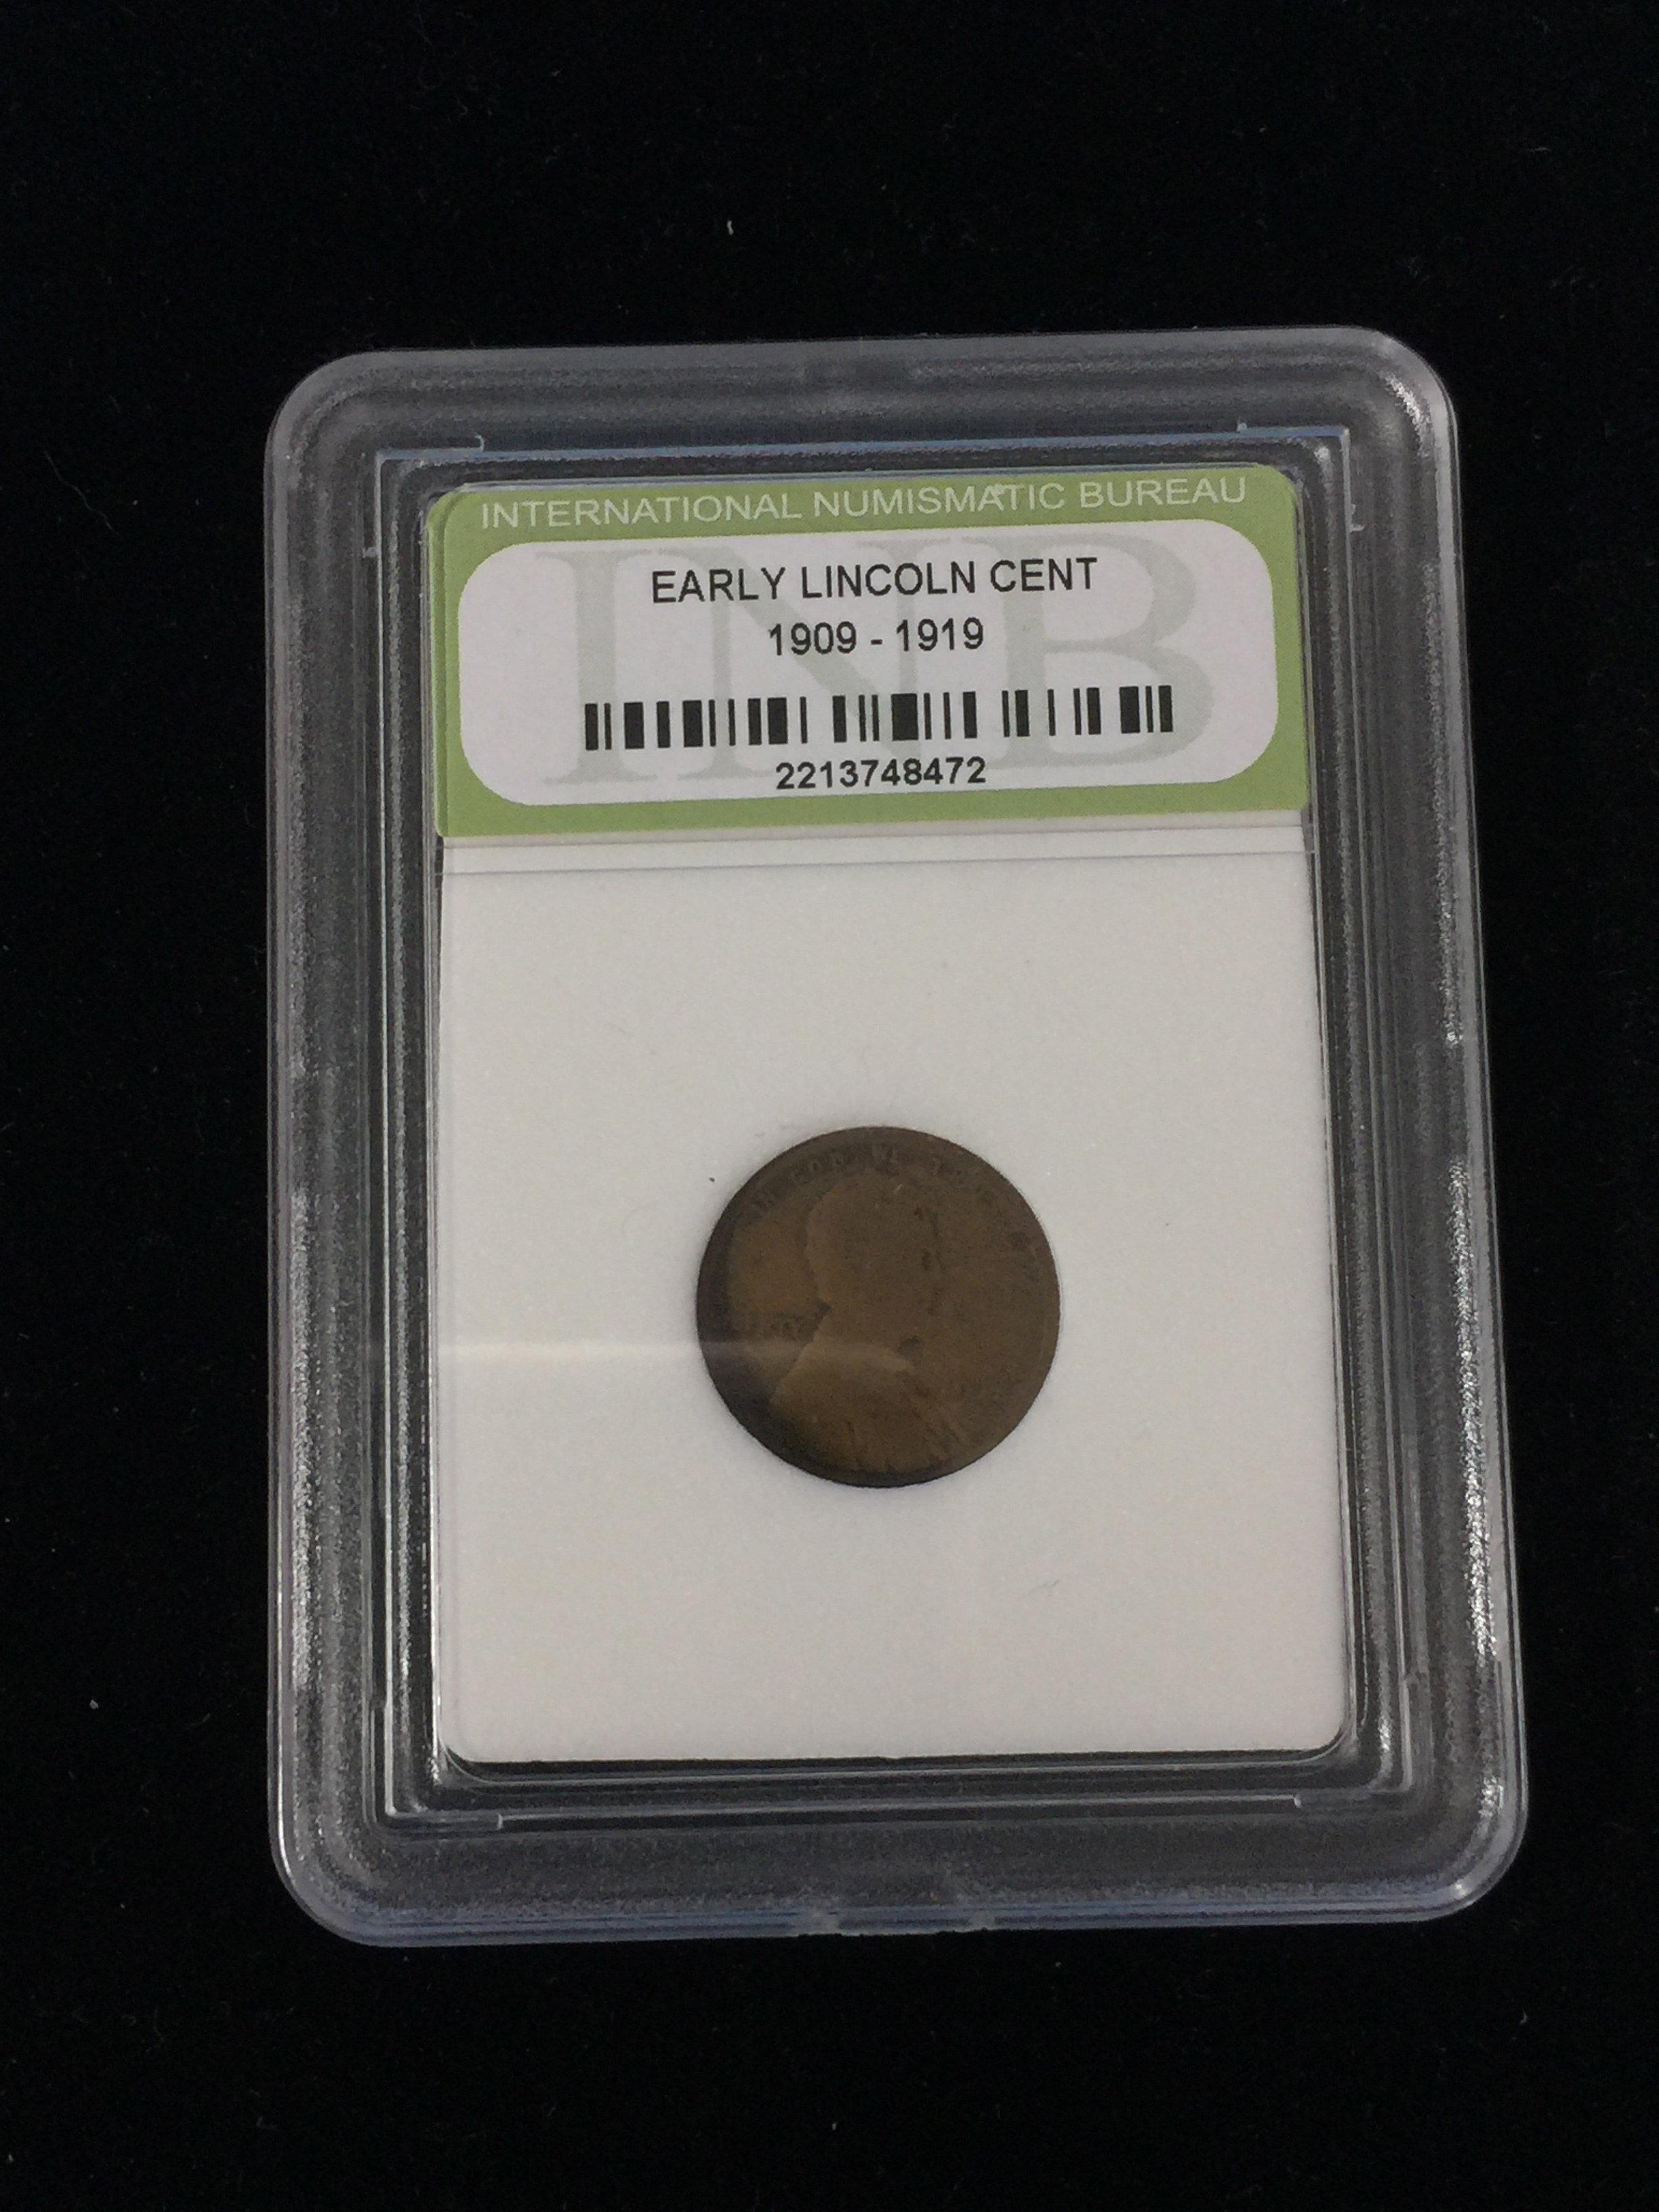 INB Slabbed 1918 United States Early Lincoln Wheat Back Penny Cent Coin